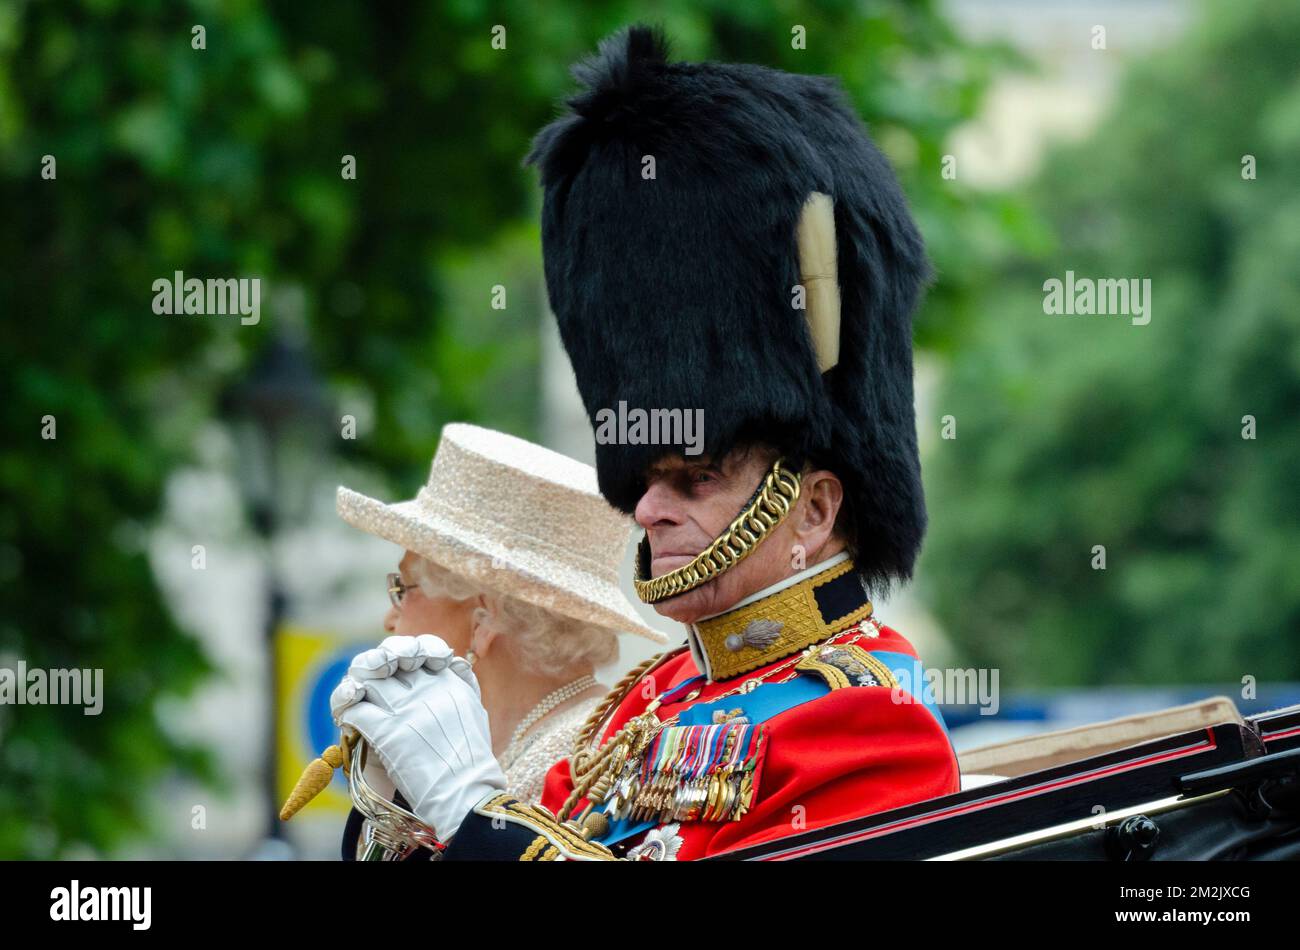 Prince Philip, Duke of Edinburgh in a carriage during Trooping the Colour 2015 in The Mall, London, UK. Wearing military uniform. With the Queen Stock Photo